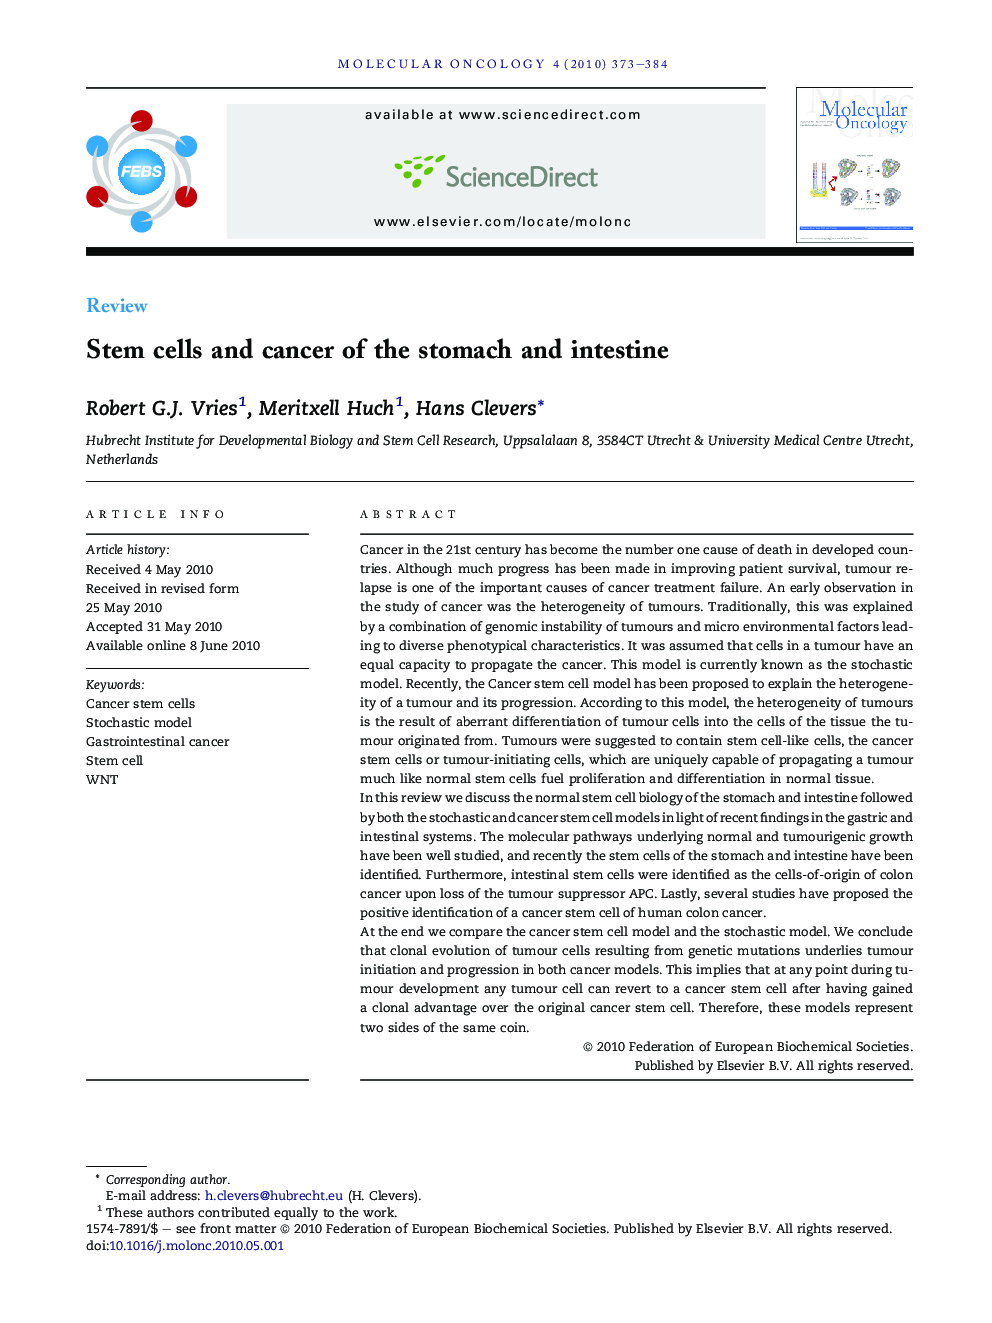 Stem cells and cancer of the stomach and intestine